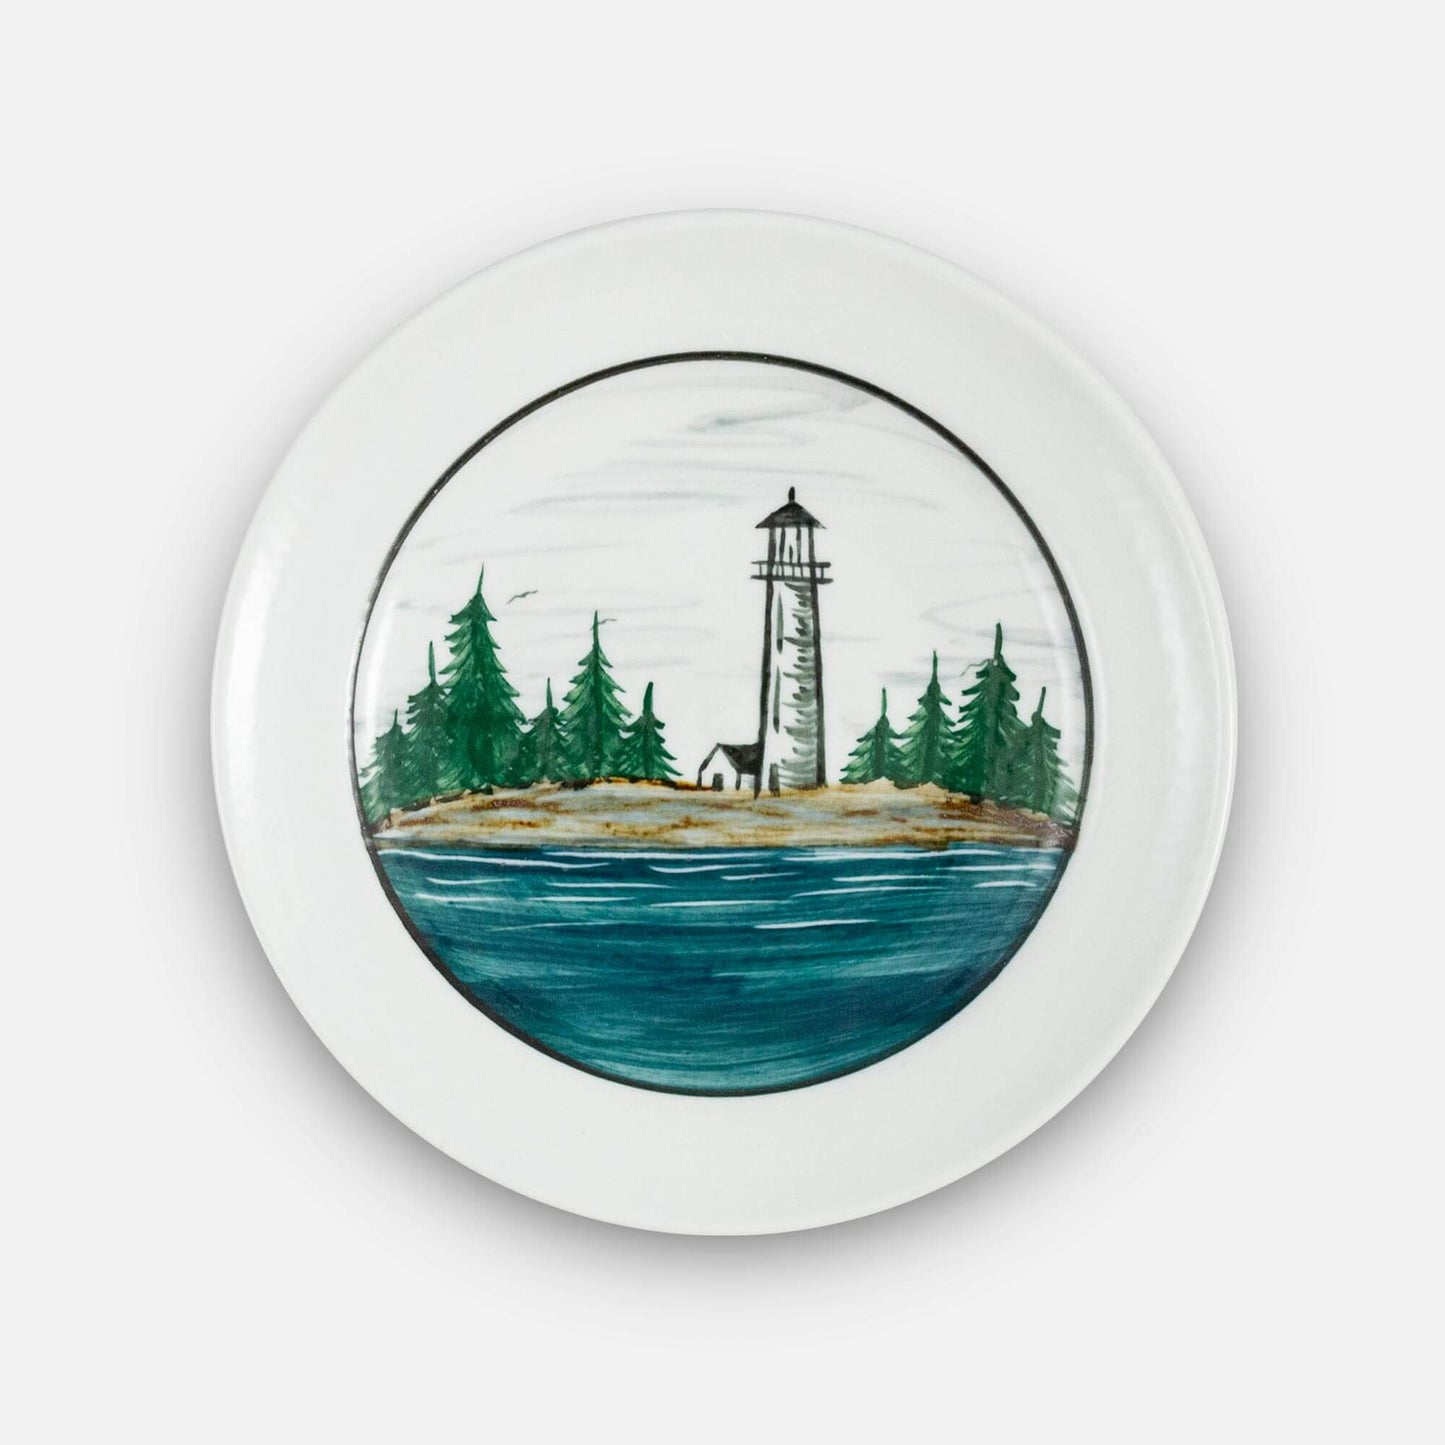 Handmade Pottery Footed Dinner Plate in Lighthouse pattern made by Georgetown Pottery in Maine